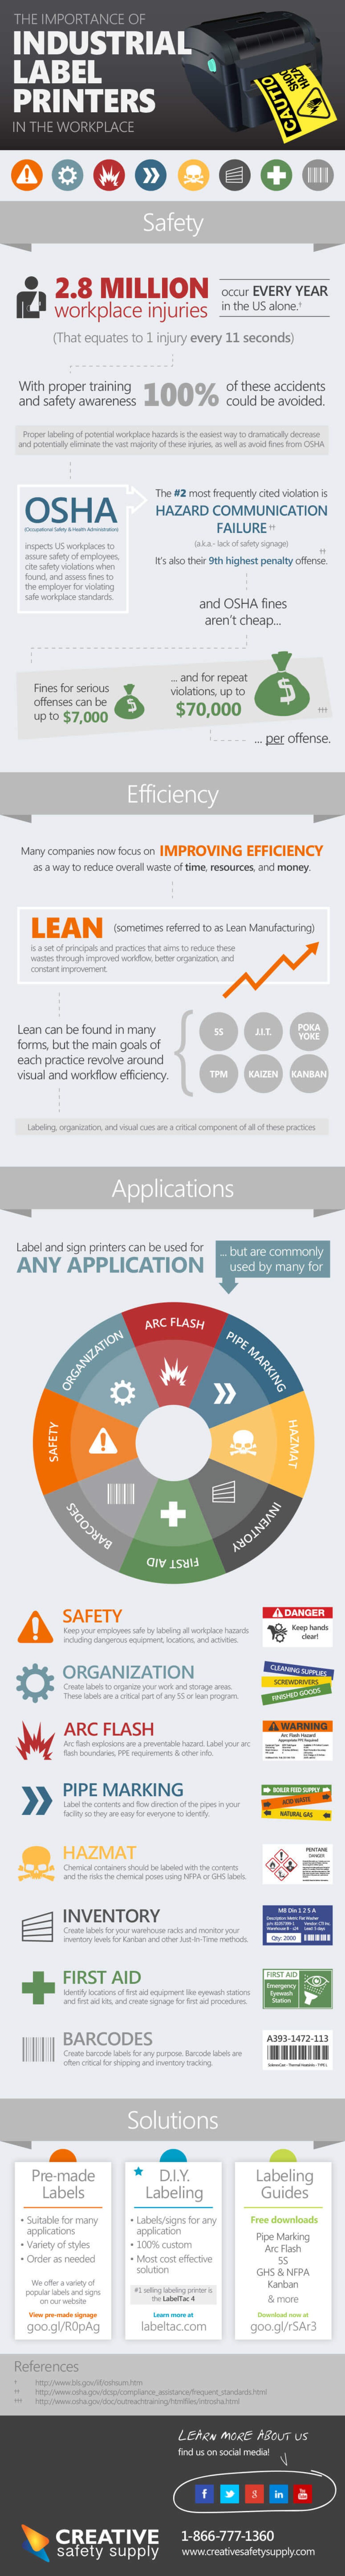 industrial label printers in the workplace infographic